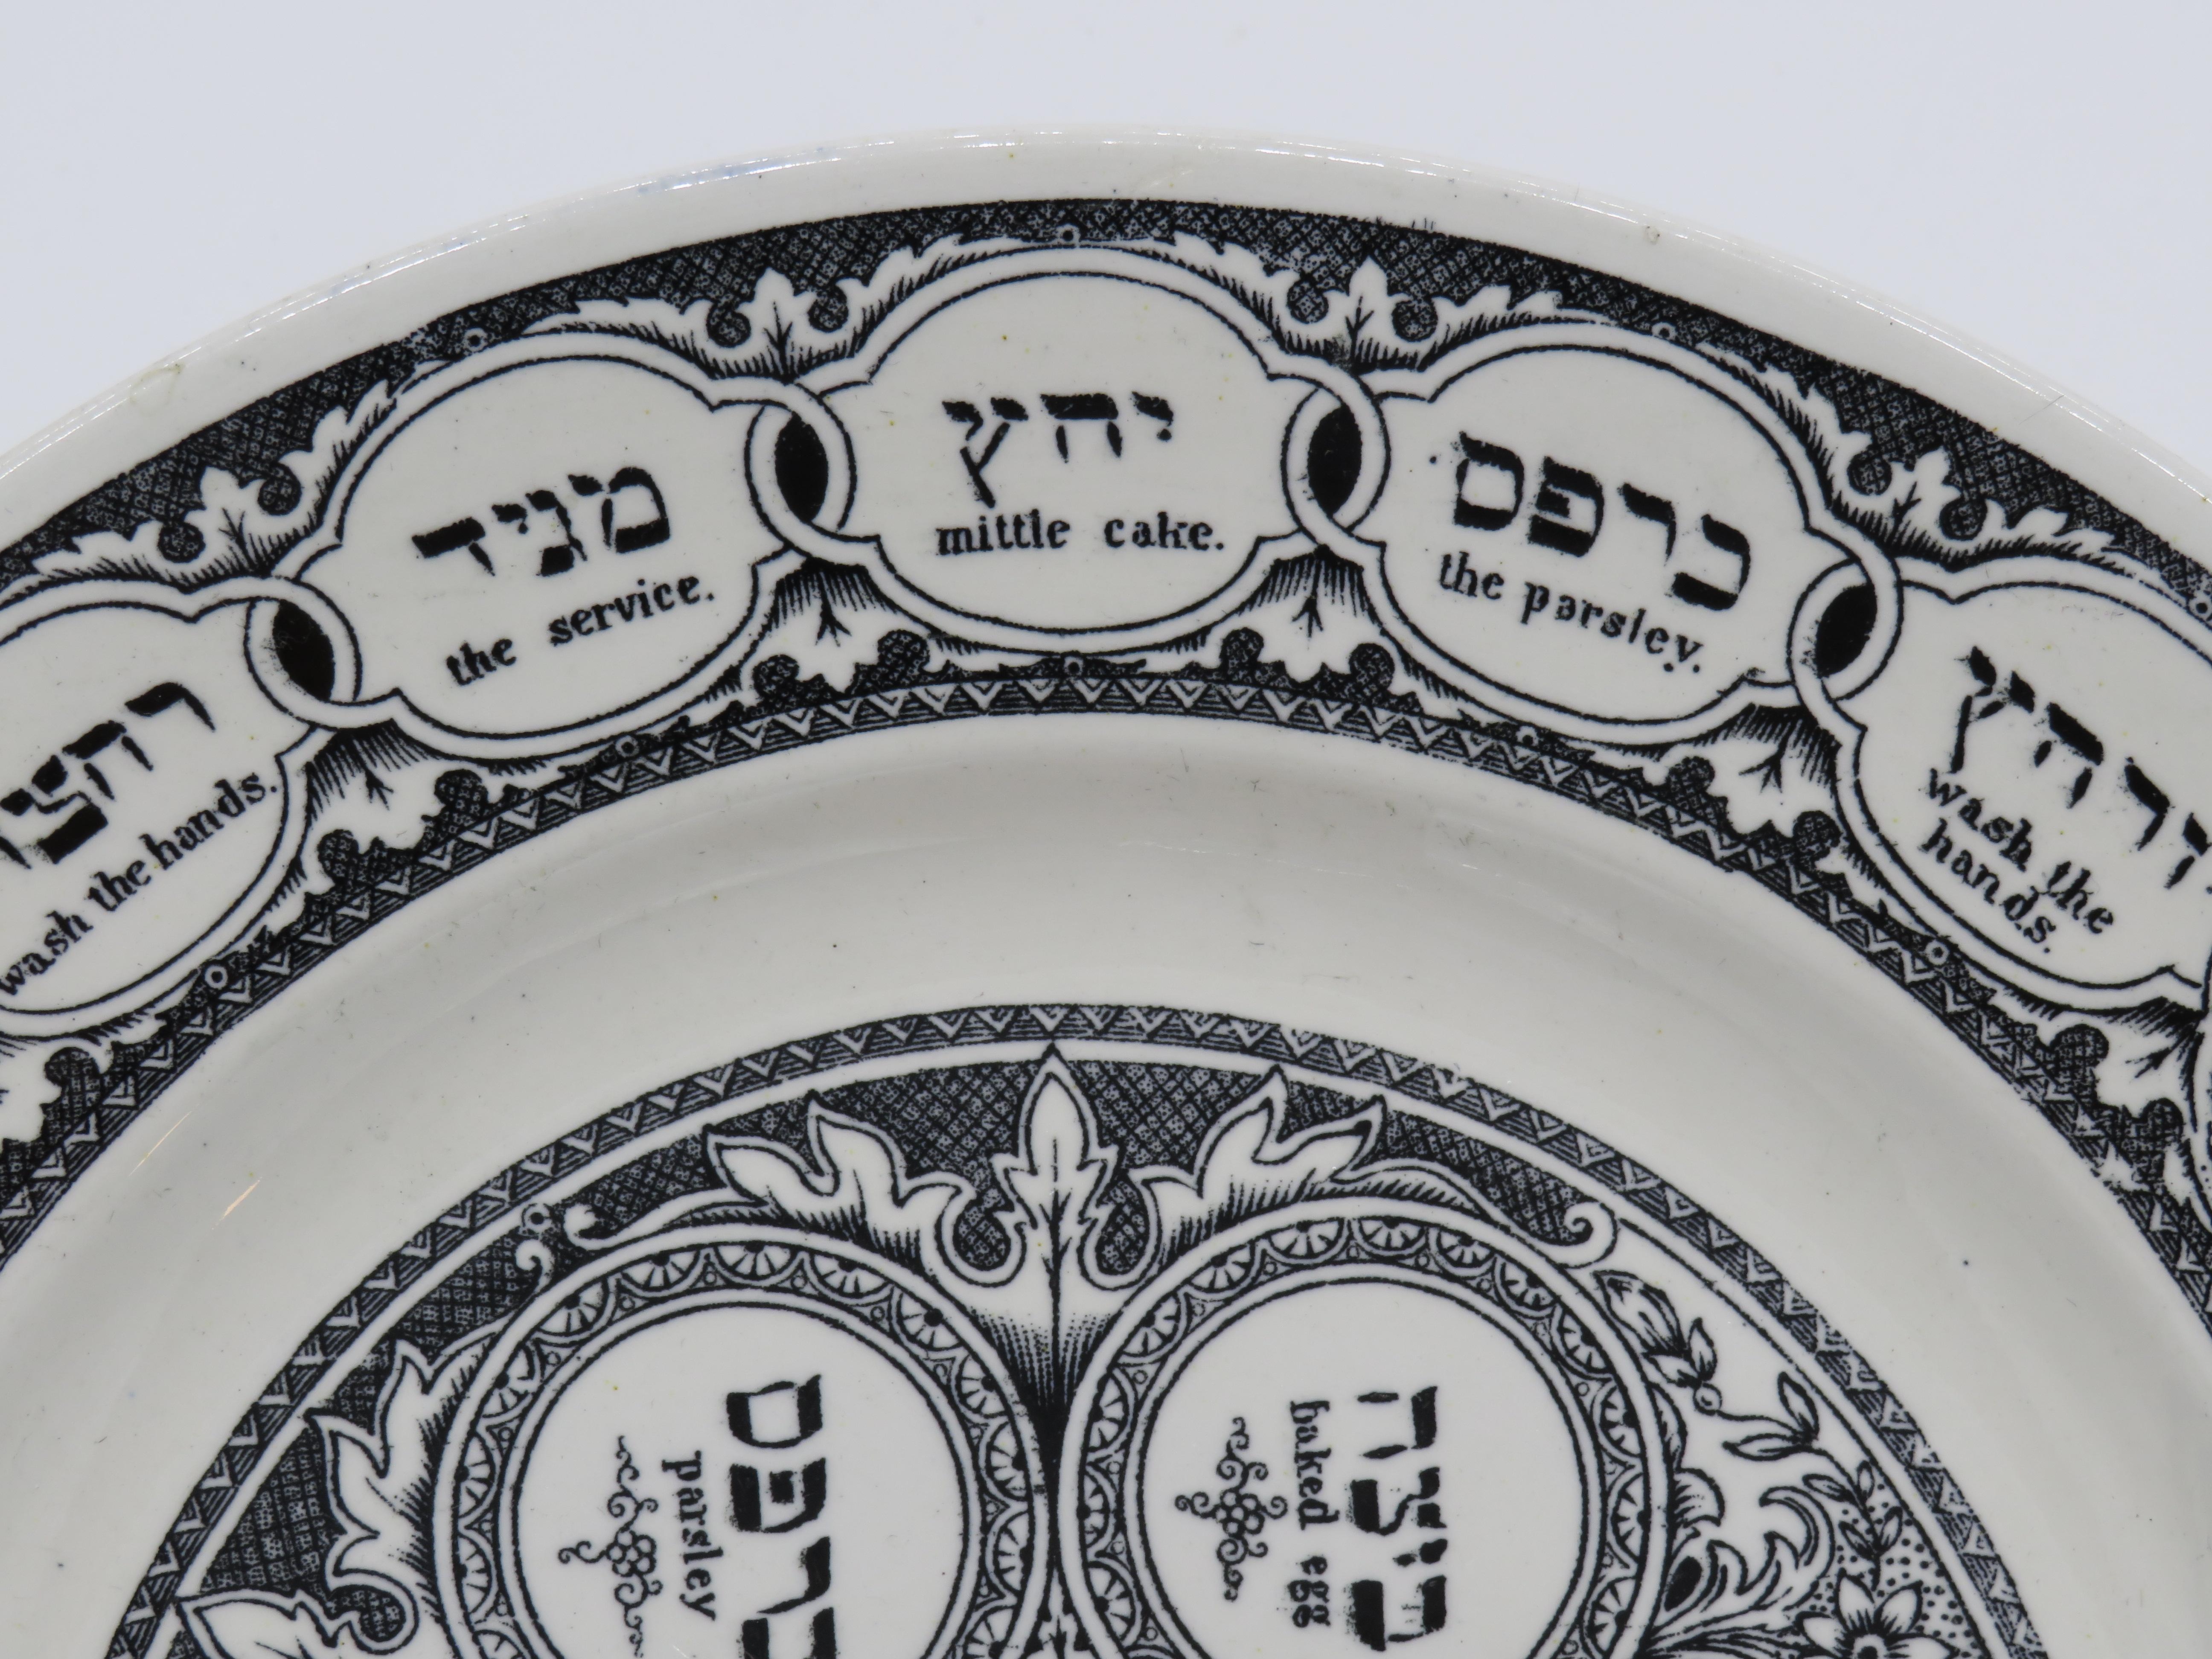 Mid-19th Century English Pottery Passover Plate 1